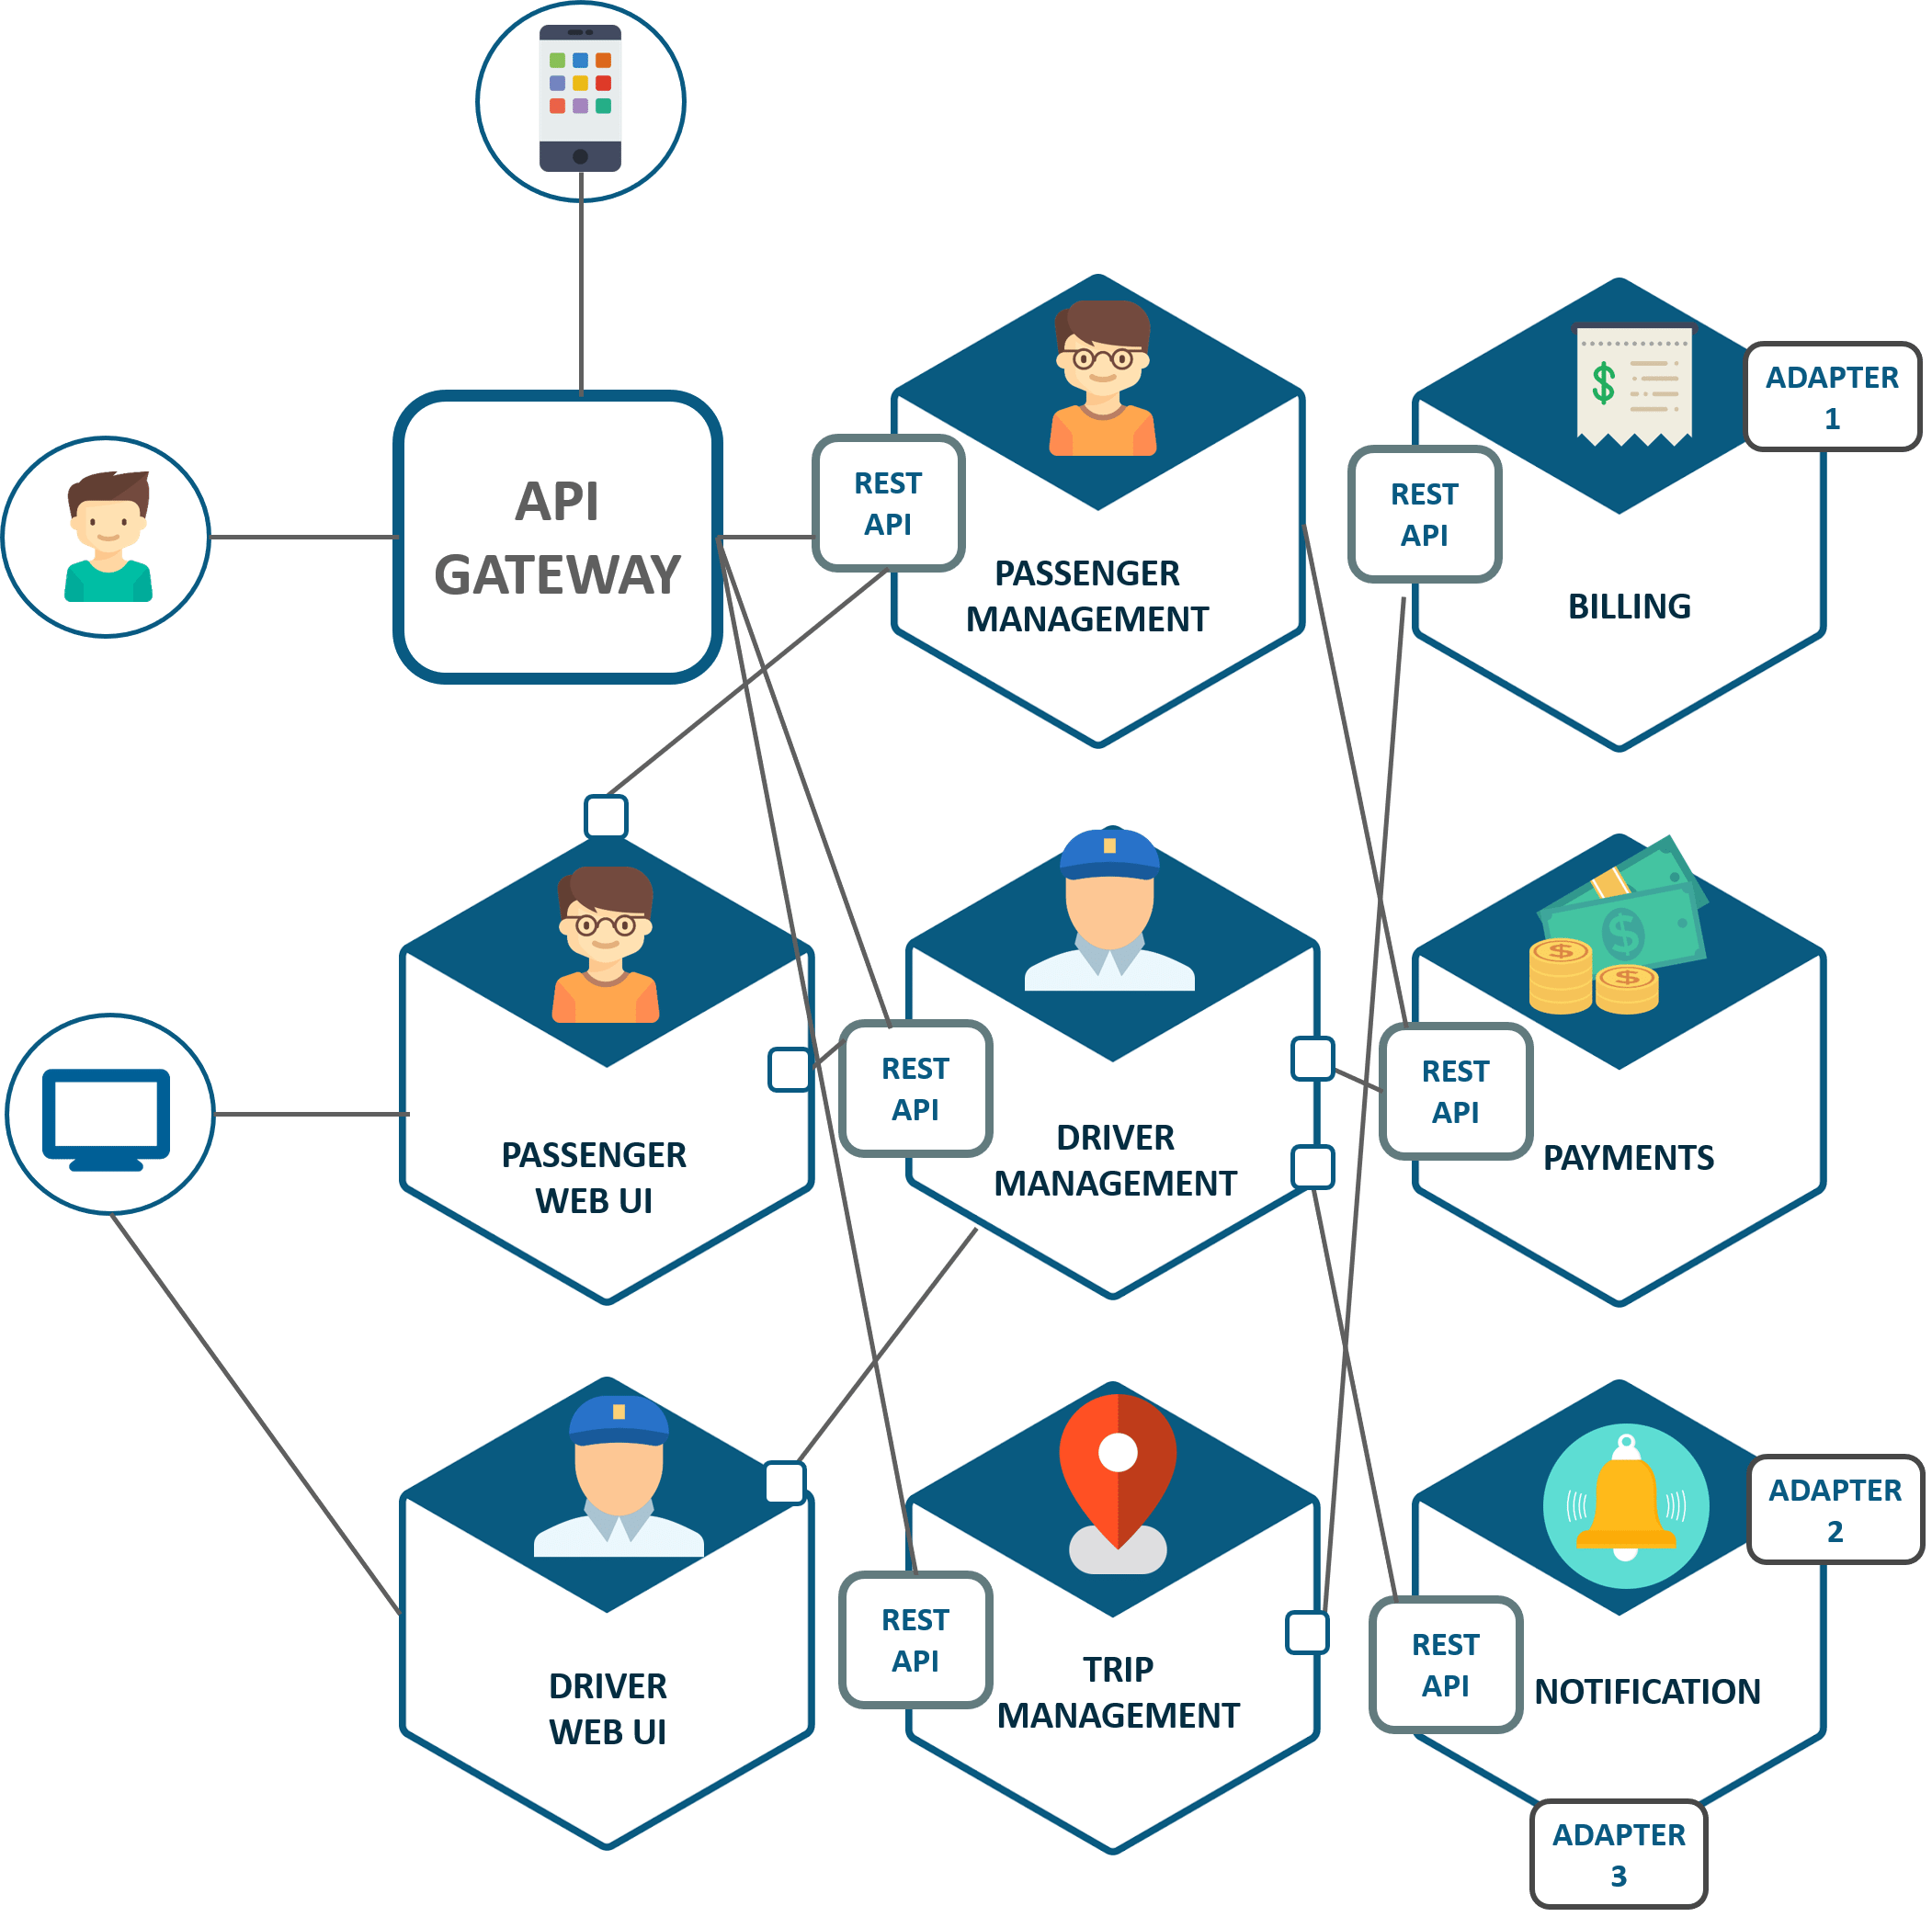 Giao tiếp trong Microservices